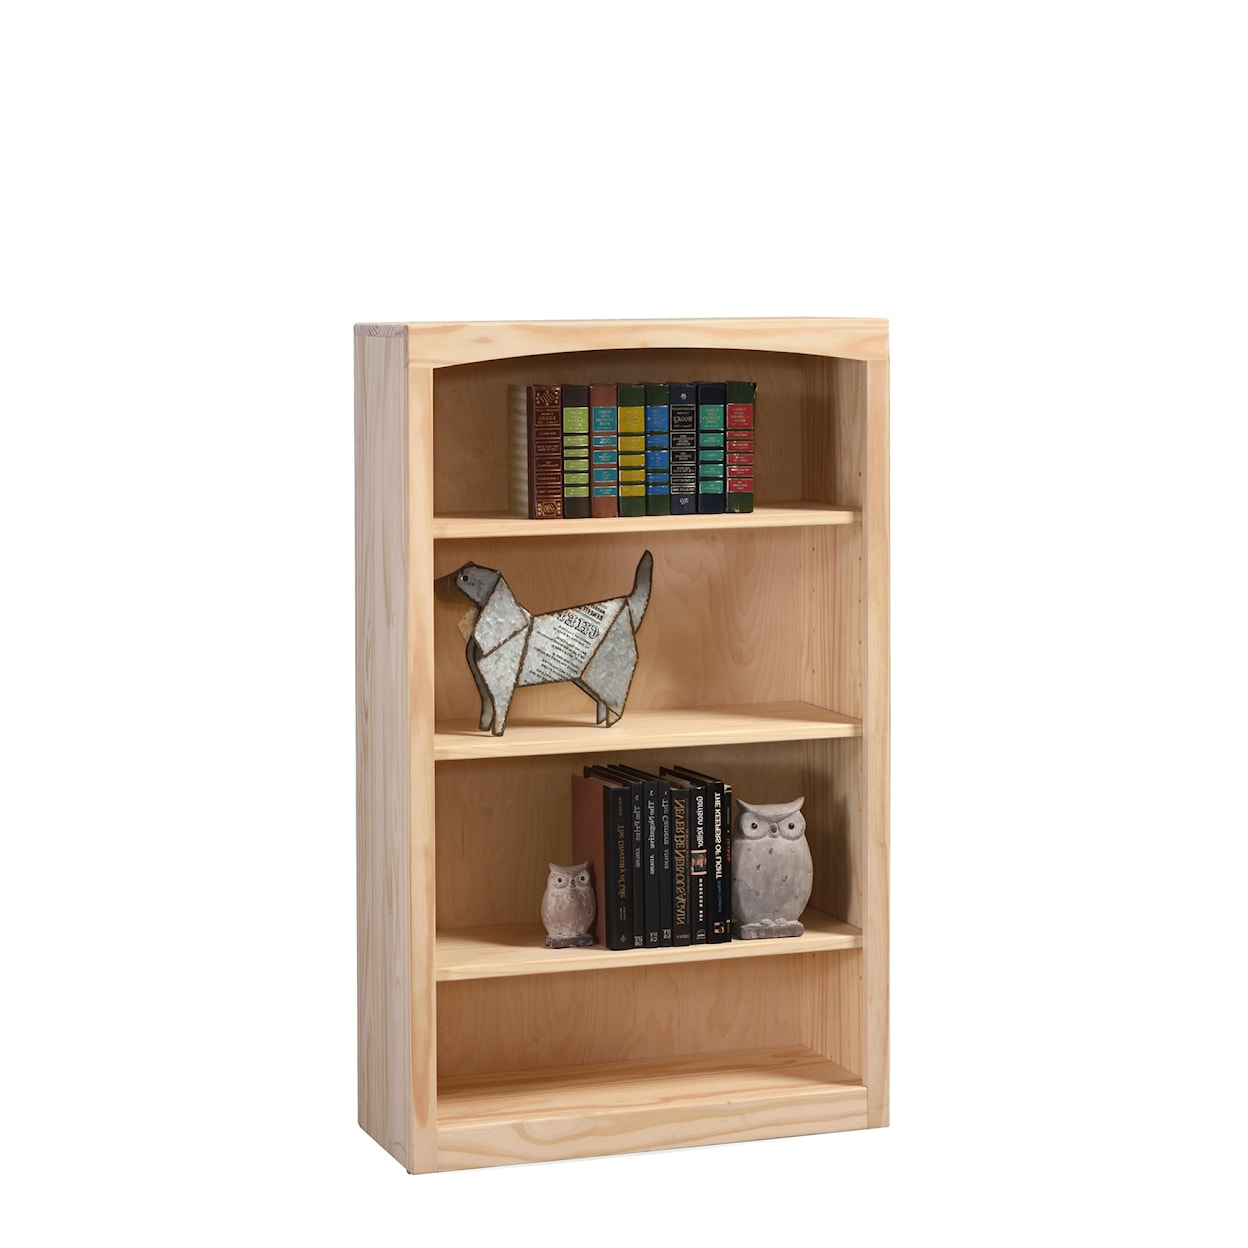 Archbold Furniture Pine Bookcases 3048 48 Tall Pine Bookcase With 3 Shelves Westrich